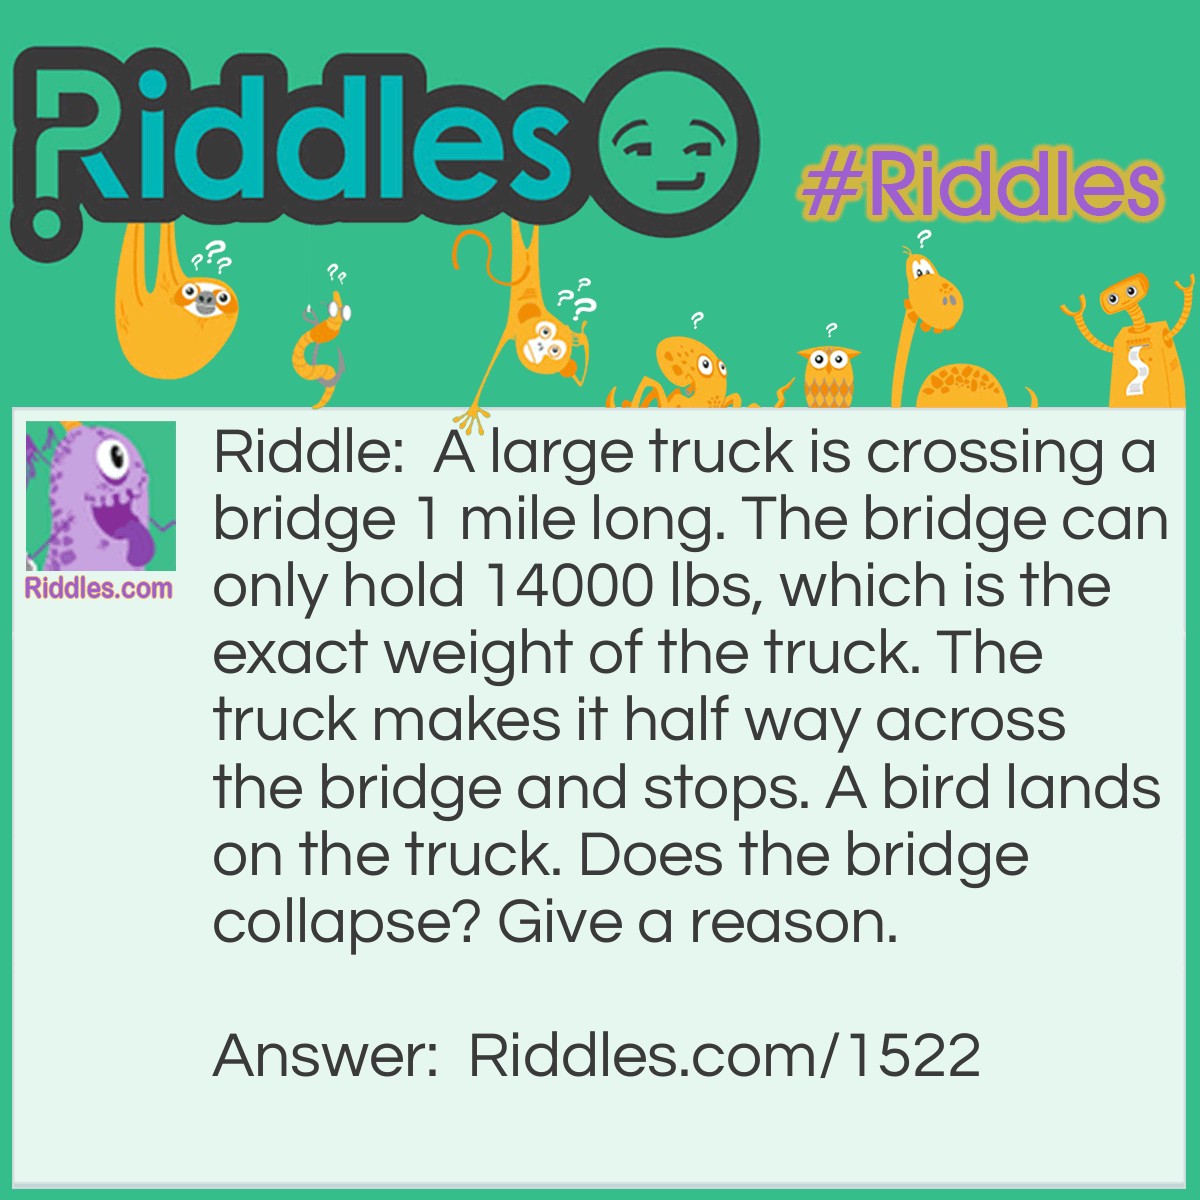 Riddle: A large truck is crossing a bridge 1 mile long. The bridge can only hold 14000 lbs, which is the exact weight of the truck. The truck makes it half way across the bridge and stops. A bird lands on the truck. Does the bridge collapse? Give a reason. Answer: No it does not collapse. Because it has driven a half mile - you would subtract the gas used from the total weight of the truck